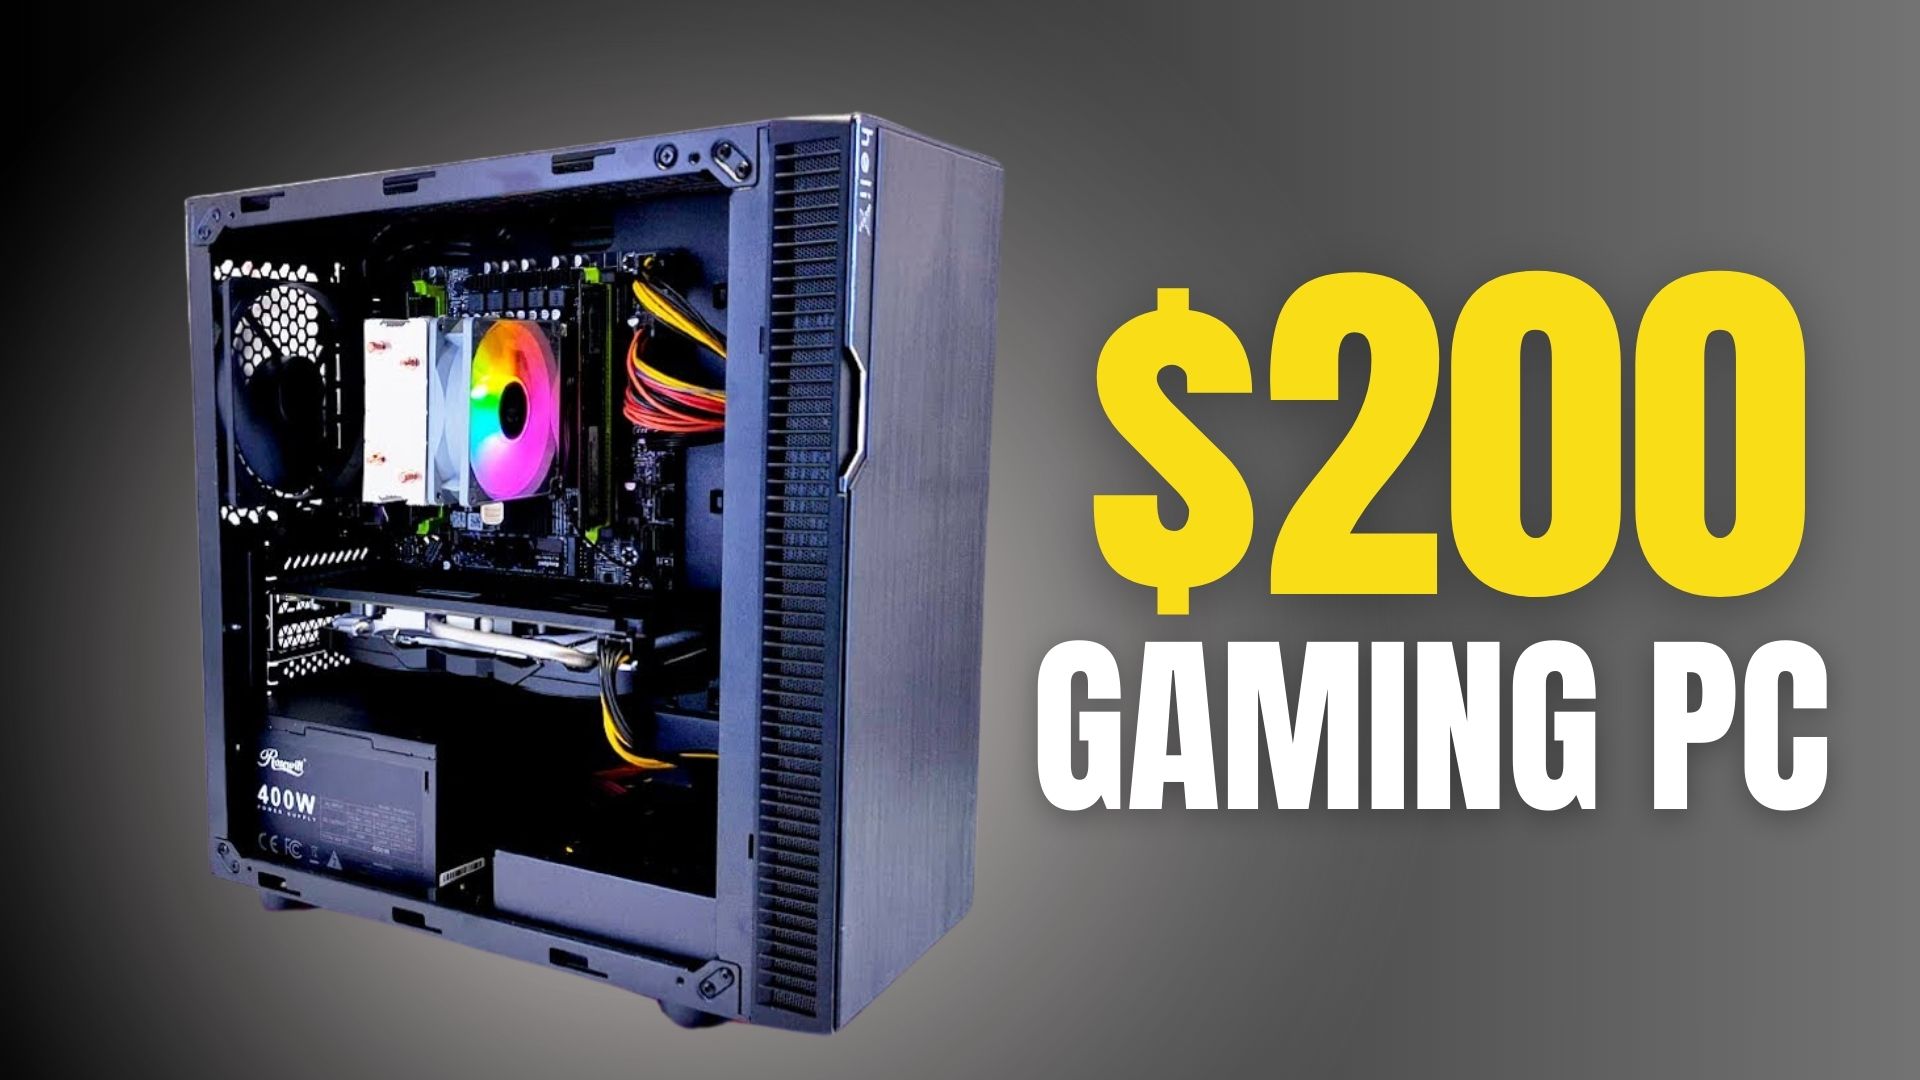 Budget Gaming PC Build Under $200